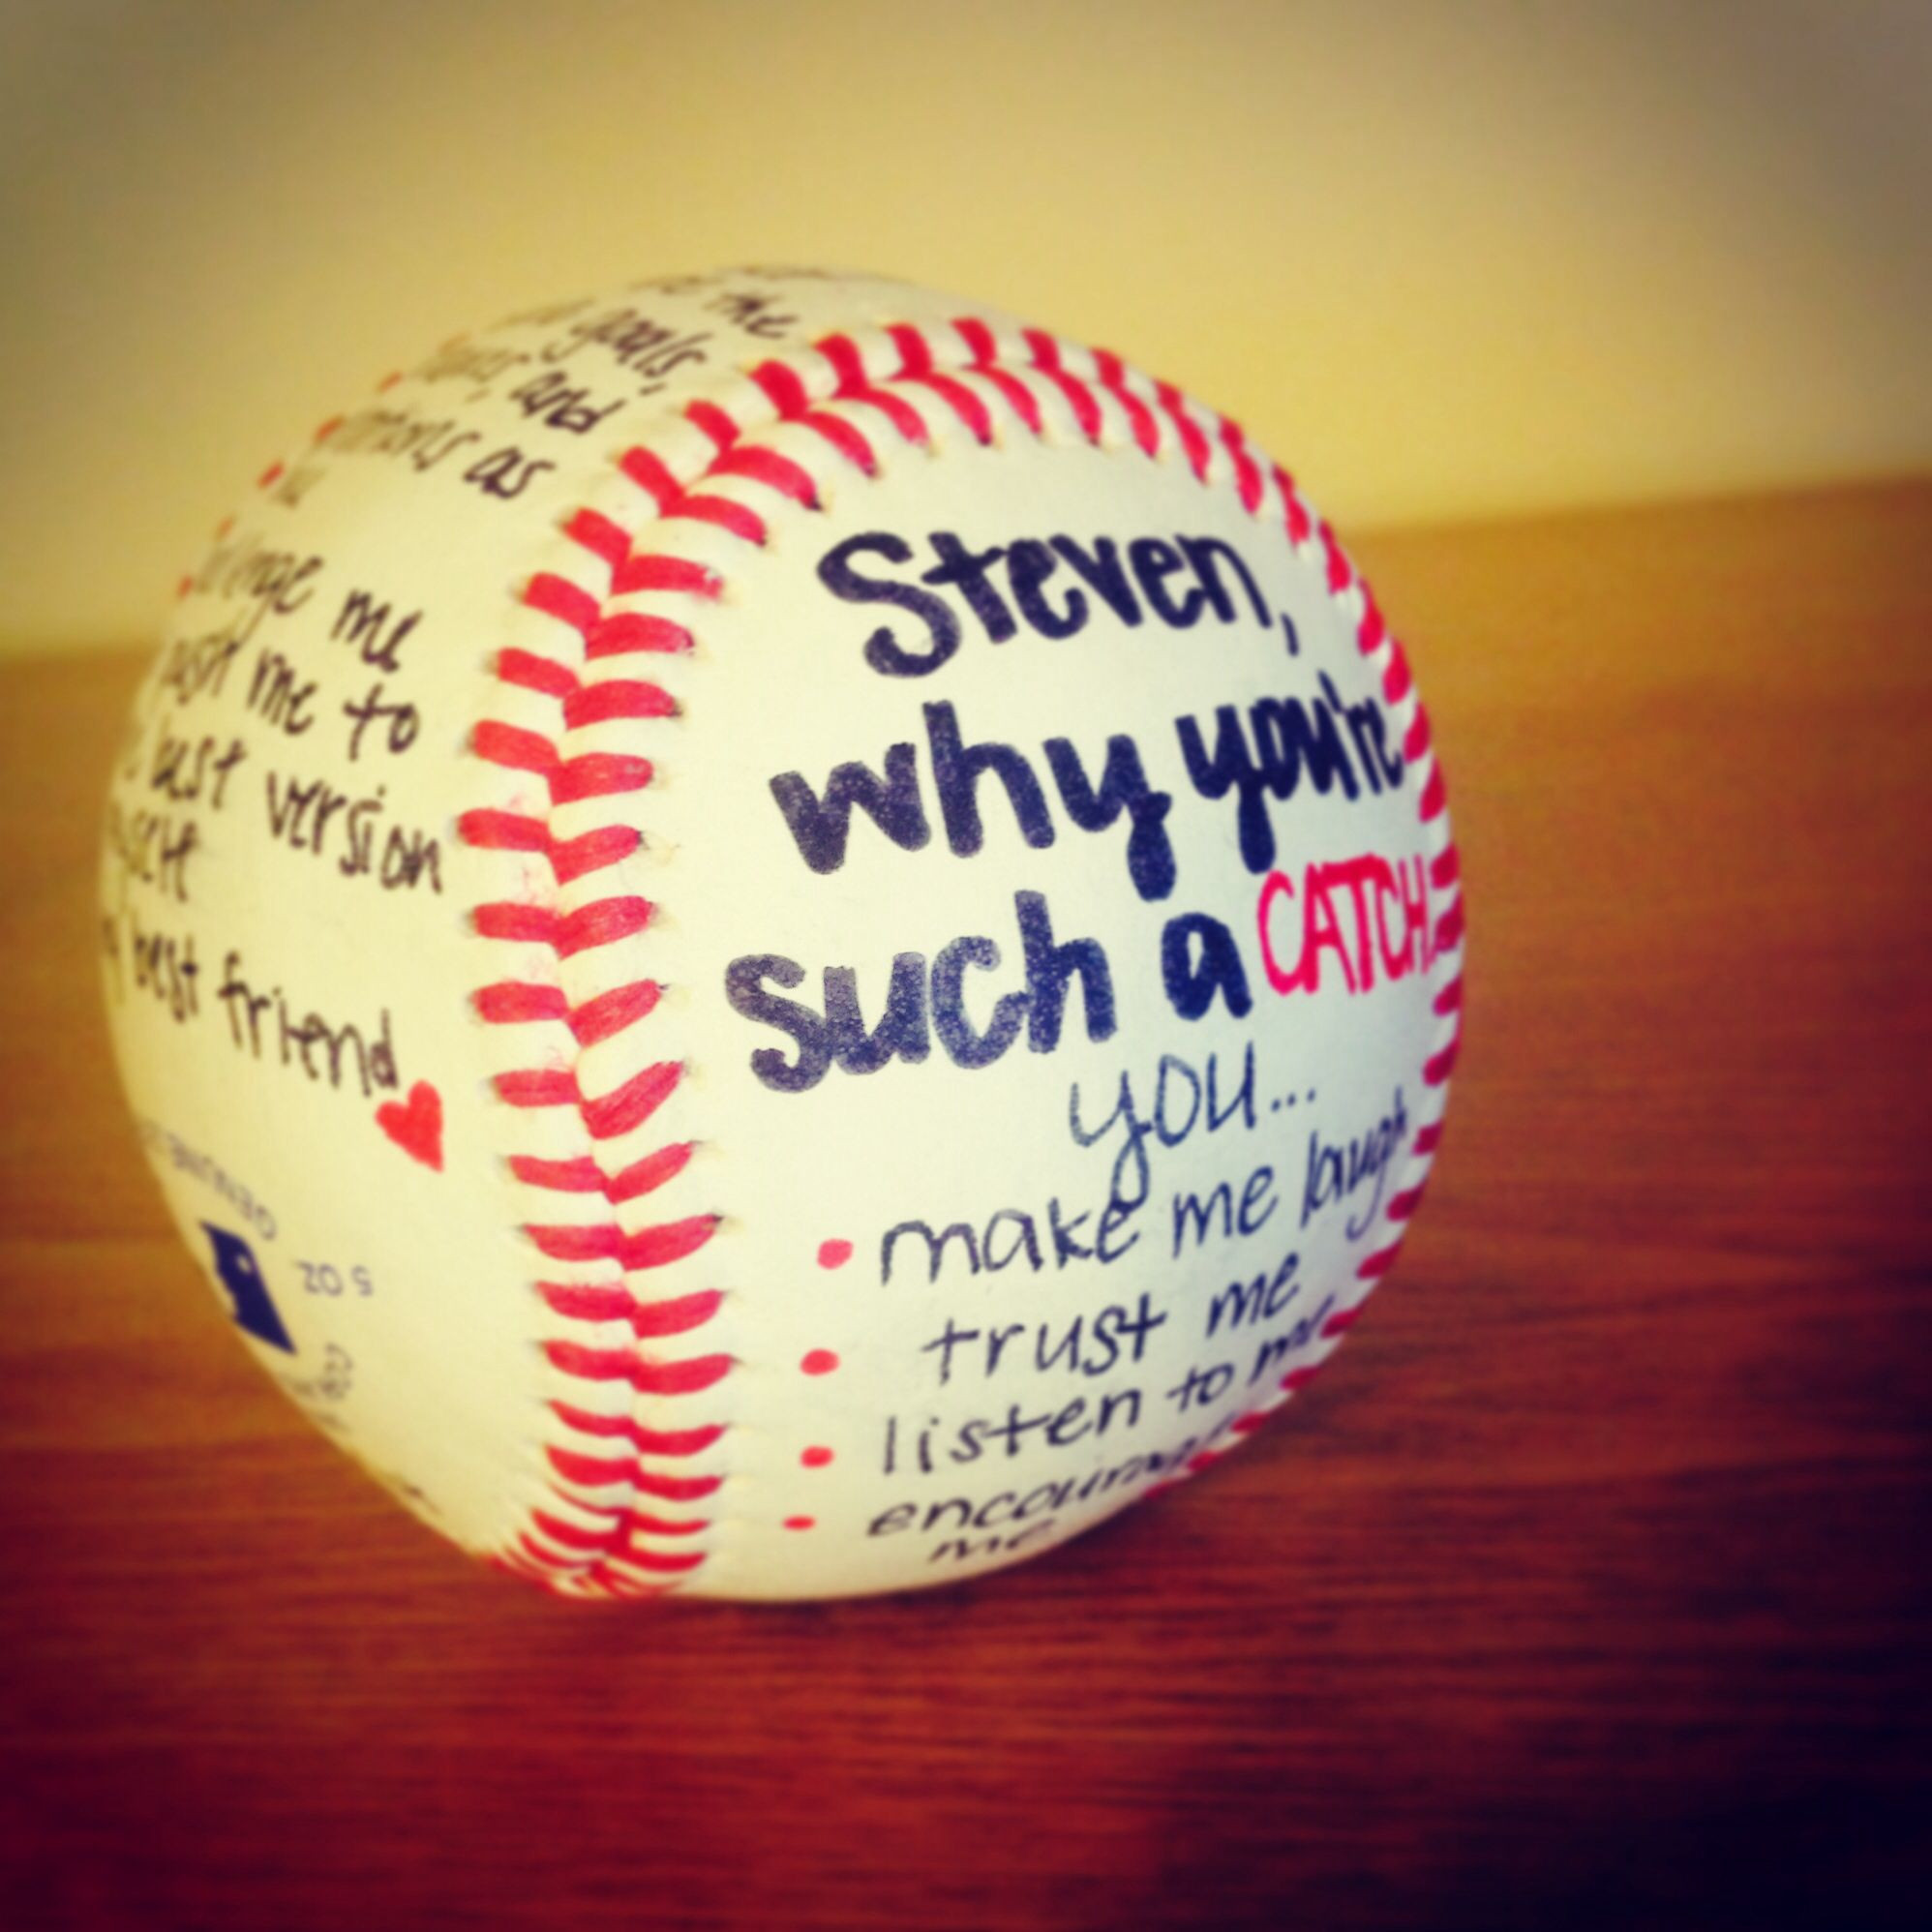 Baseball Gift Ideas For Boyfriend
 Coolest t to surprise my boyfriend baseball player with